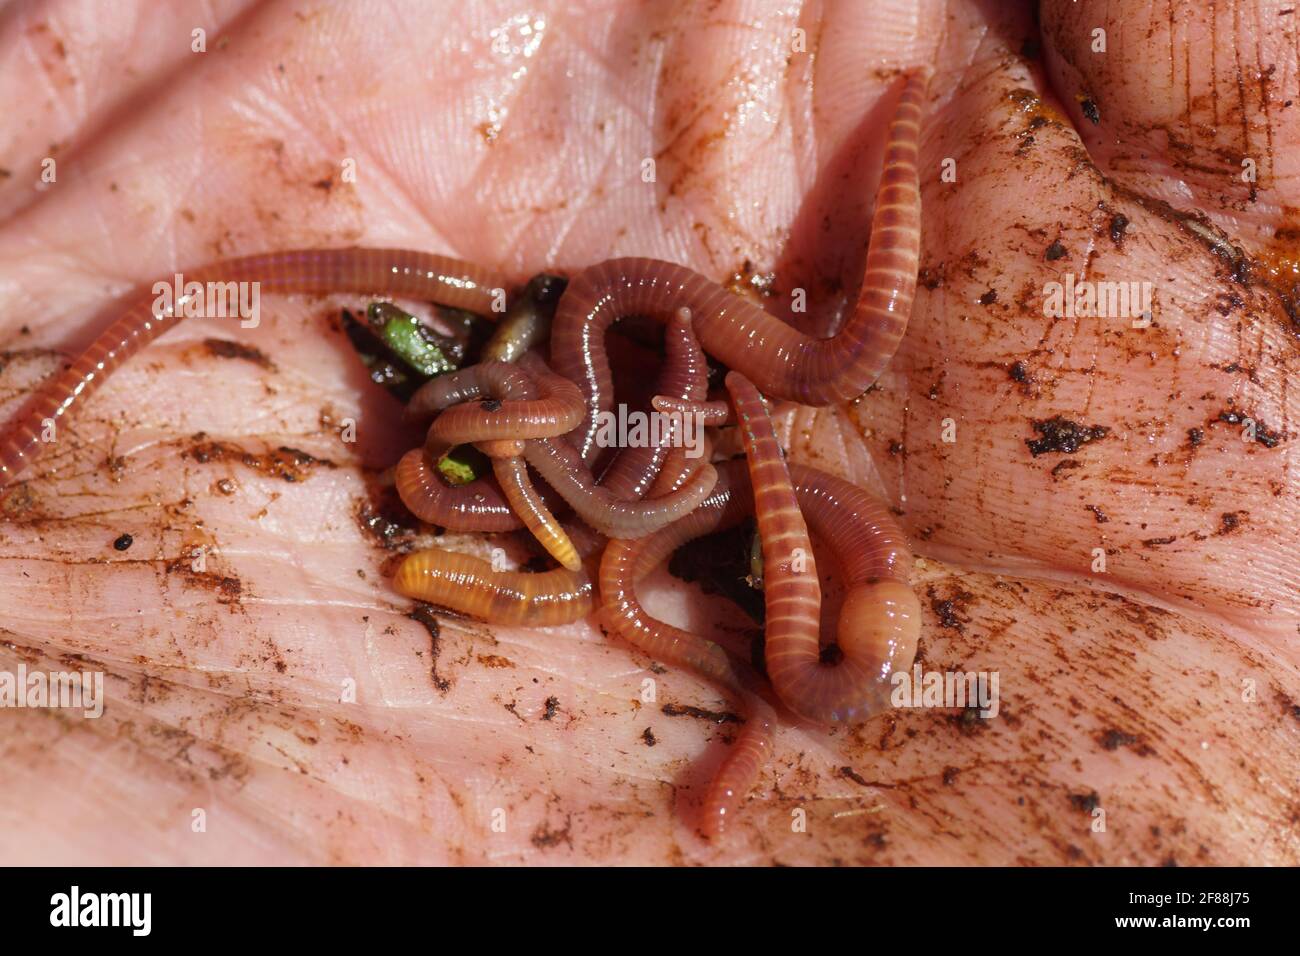 Earthworms of the family Lumbricidae in the hand. From the compost heap. Dutch garden, April, Spring, Netherlands. Stock Photo